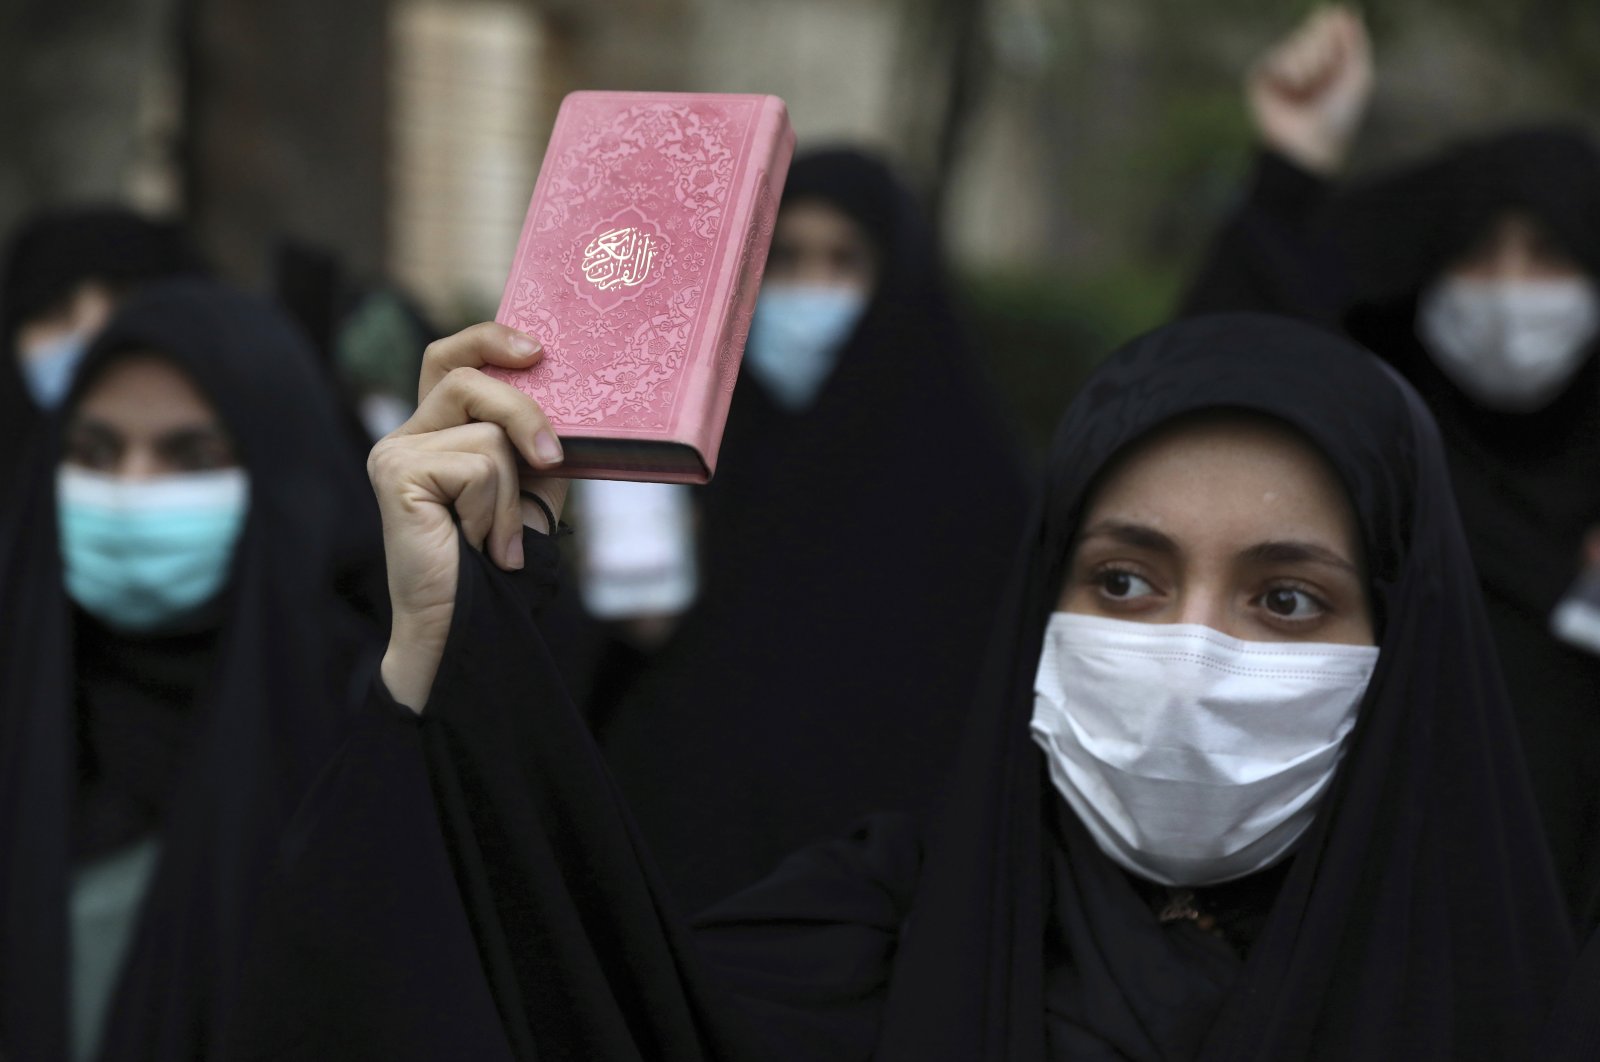 A protester holds a copy of the Quran during a demonstration to condemn planned burnings of the holy book in Sweden, in front of the Swedish Embassy in Tehran, Iran, April 18, 2022. (AP Photo)